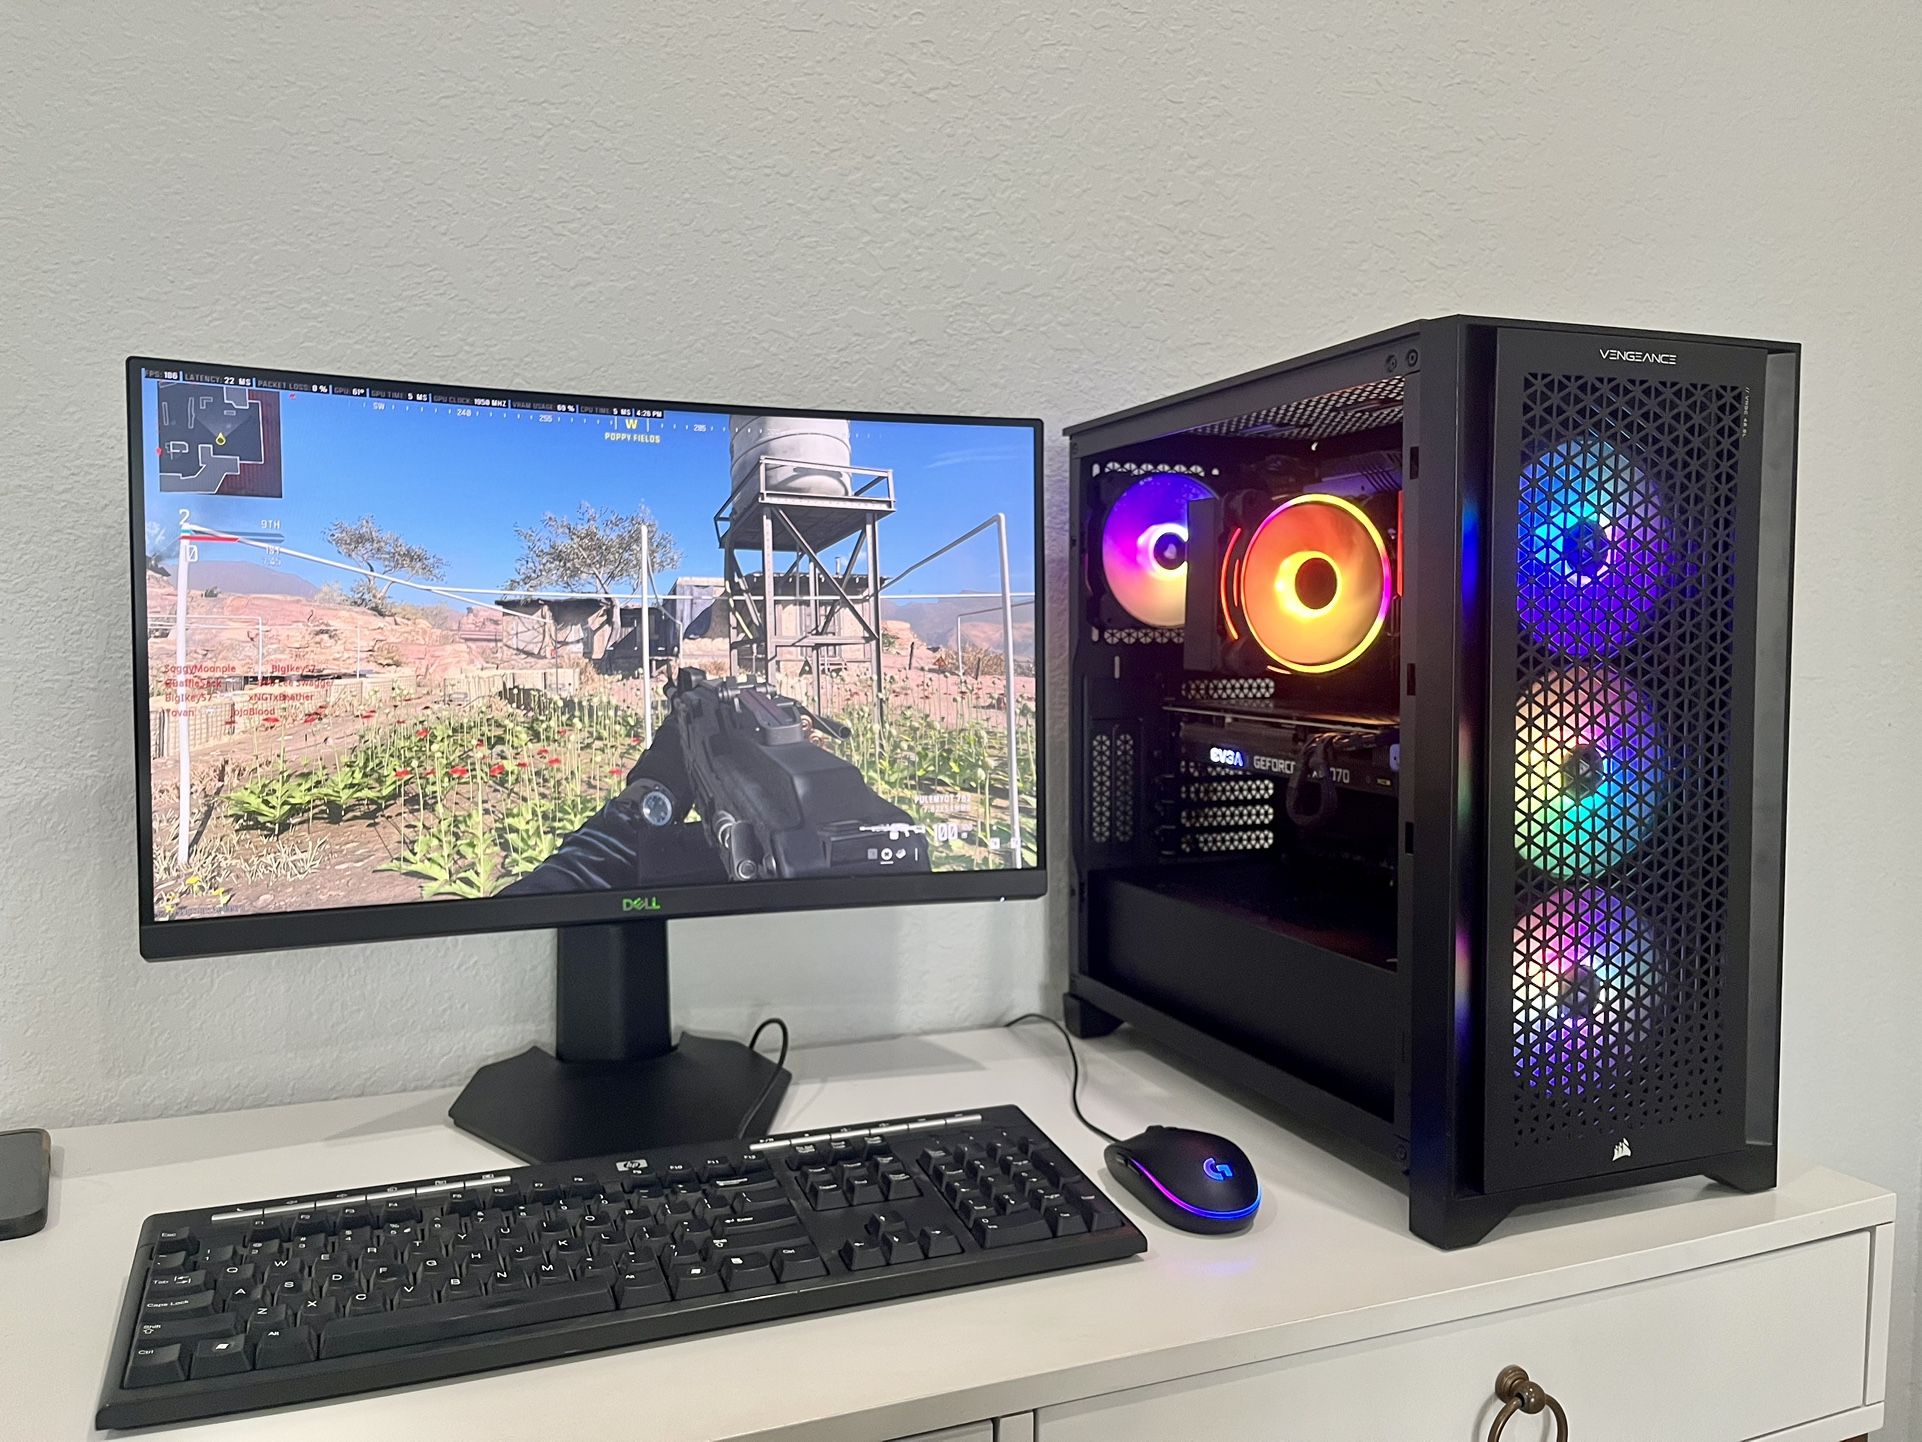 Corsair High End Gaming PC w/ Monitor, Mouse, Keyboard, Built in WiFi / Bluetooth and MW3 Preloaded